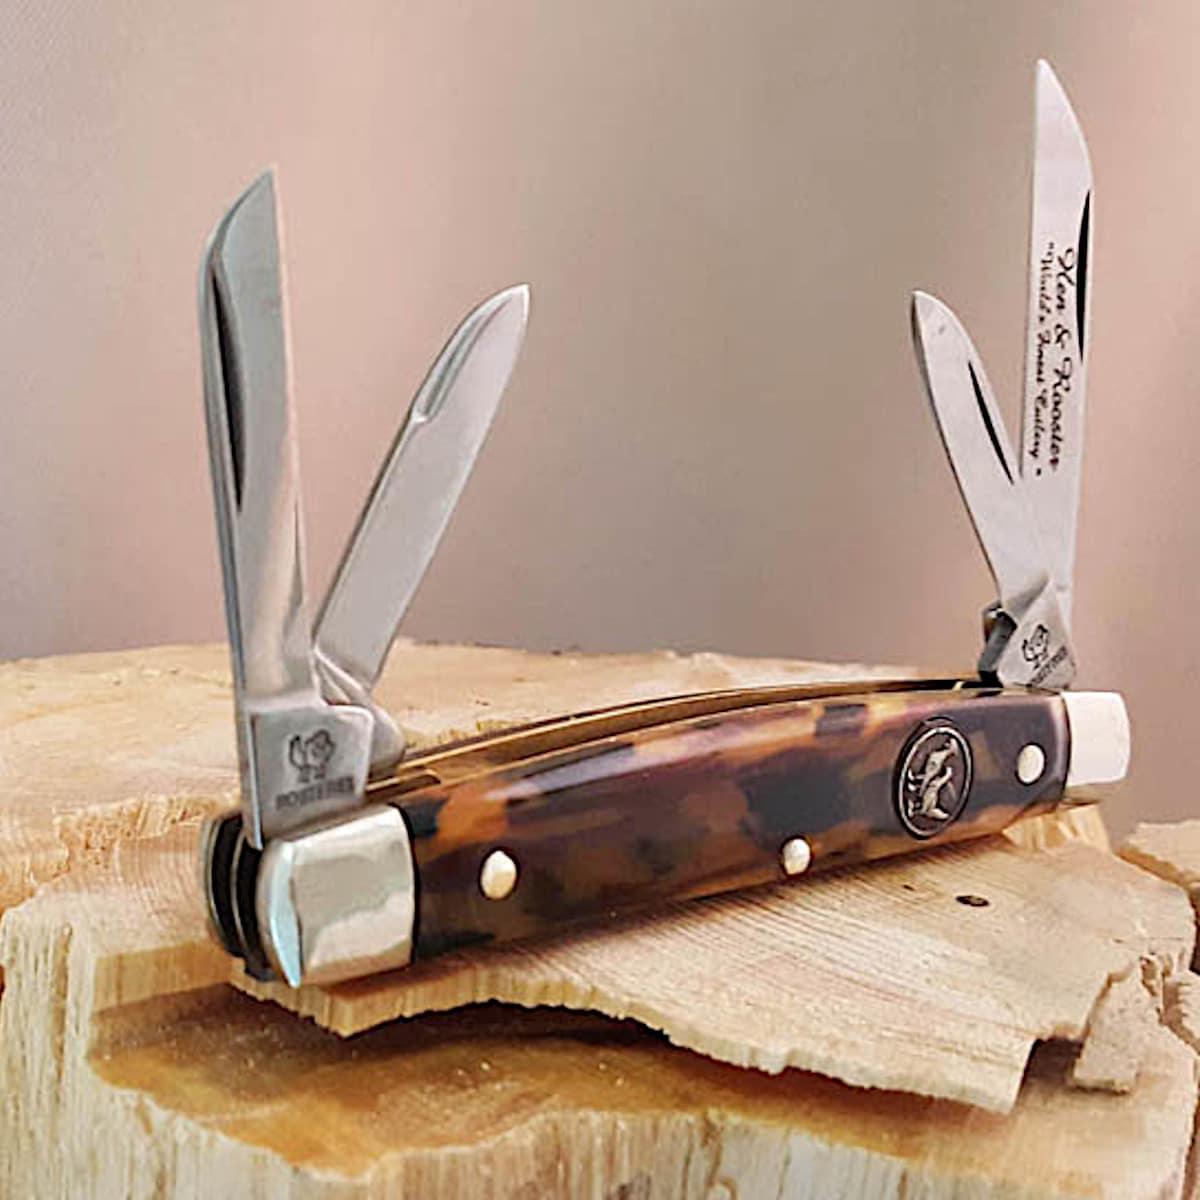 Decorative wooden knives made out of laminated wood 